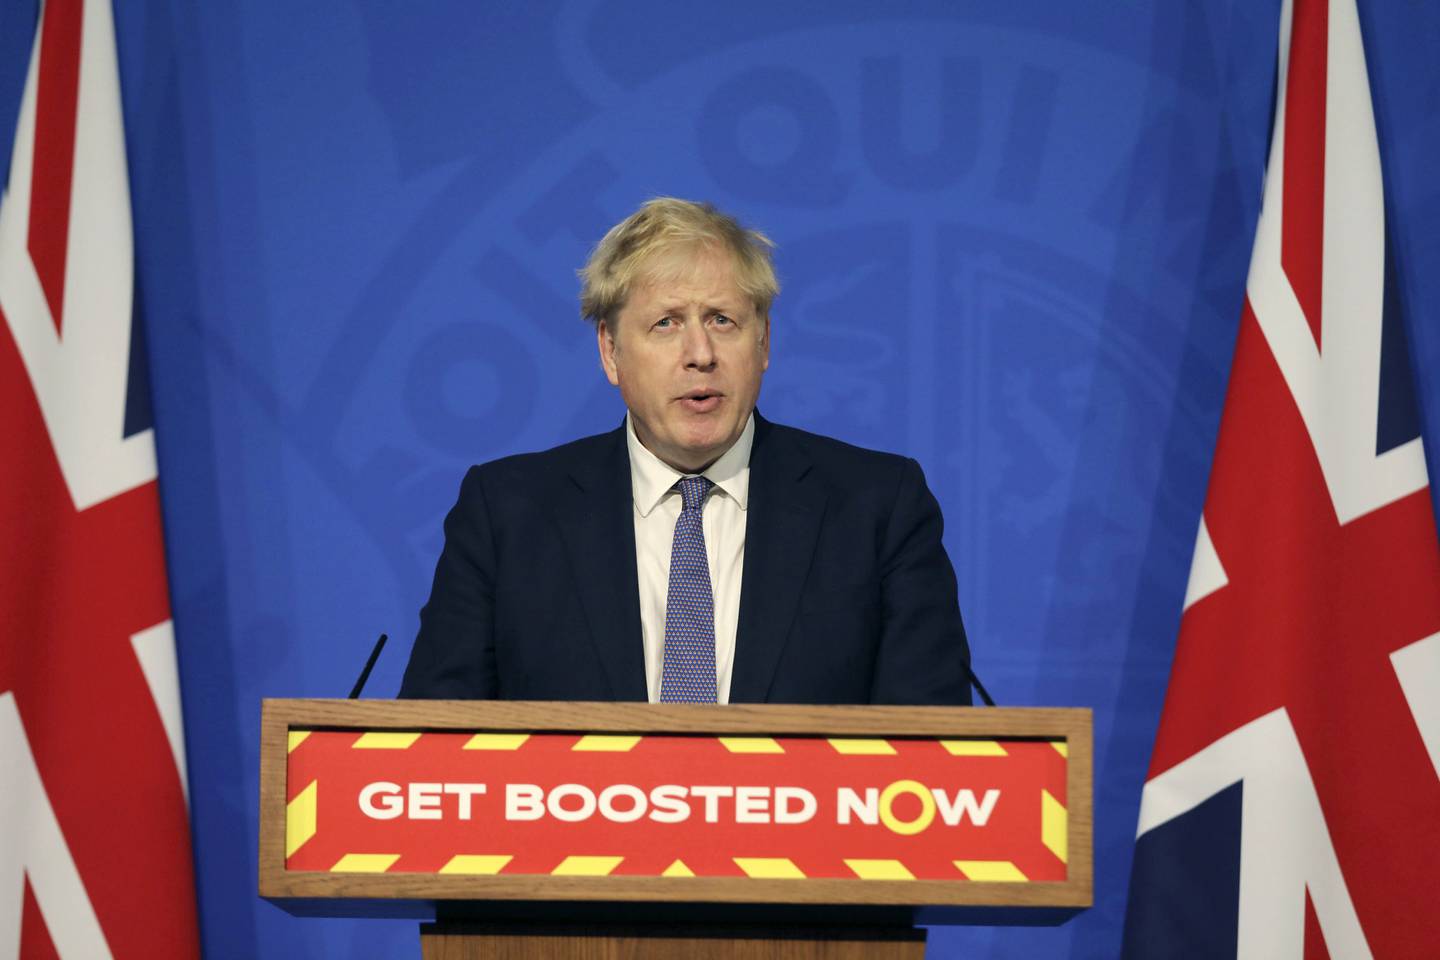 Britain's Prime Minister Boris Johnson ruled out further restrictions as cases continue to surge.